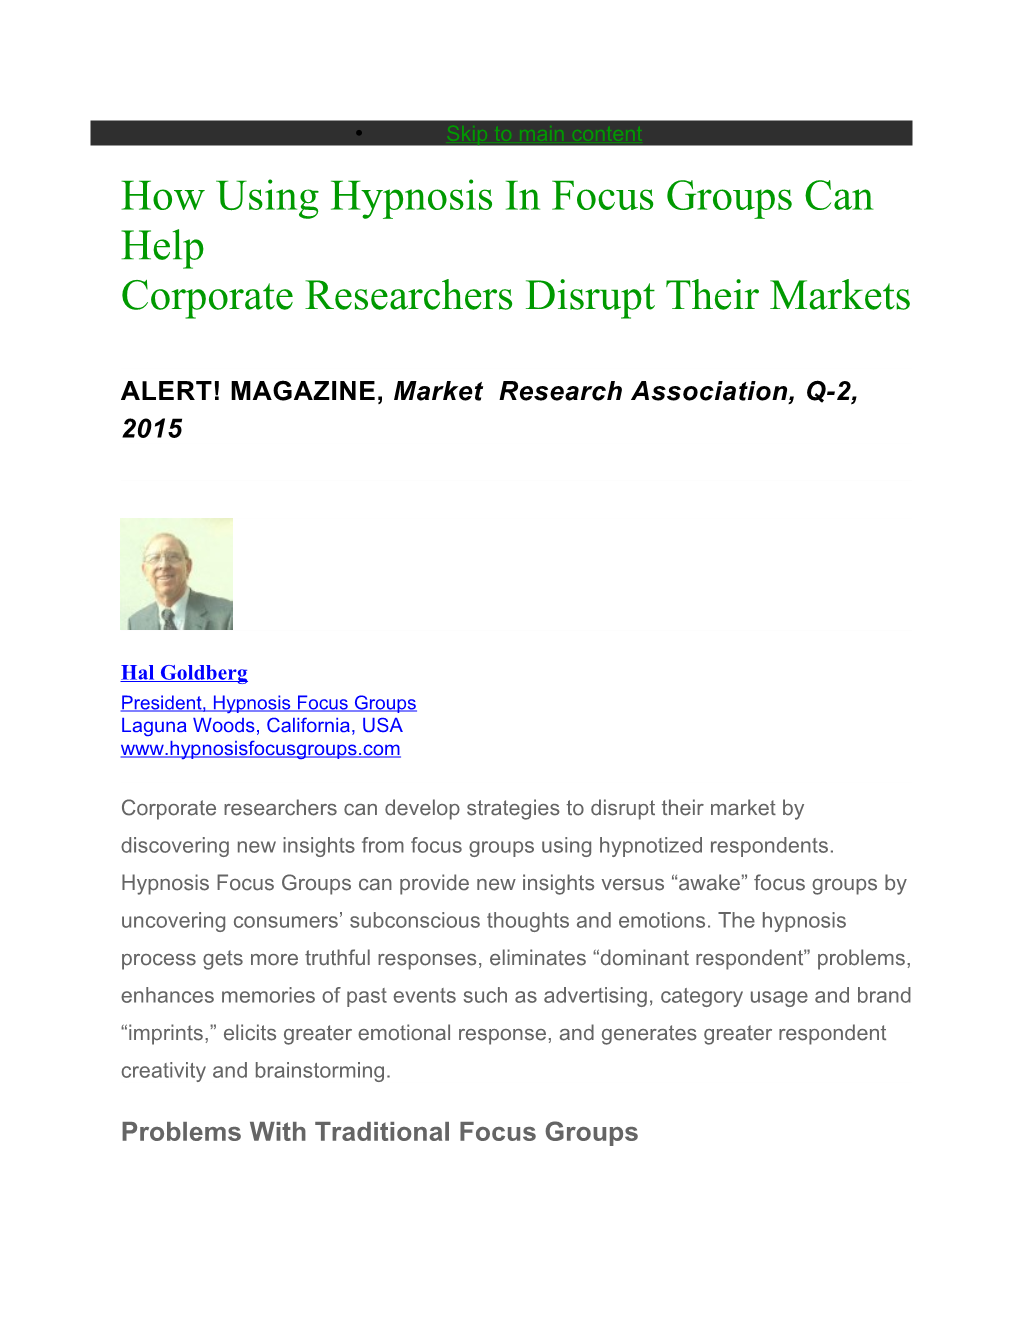 How Using Hypnosis in Focus Groups Can Help